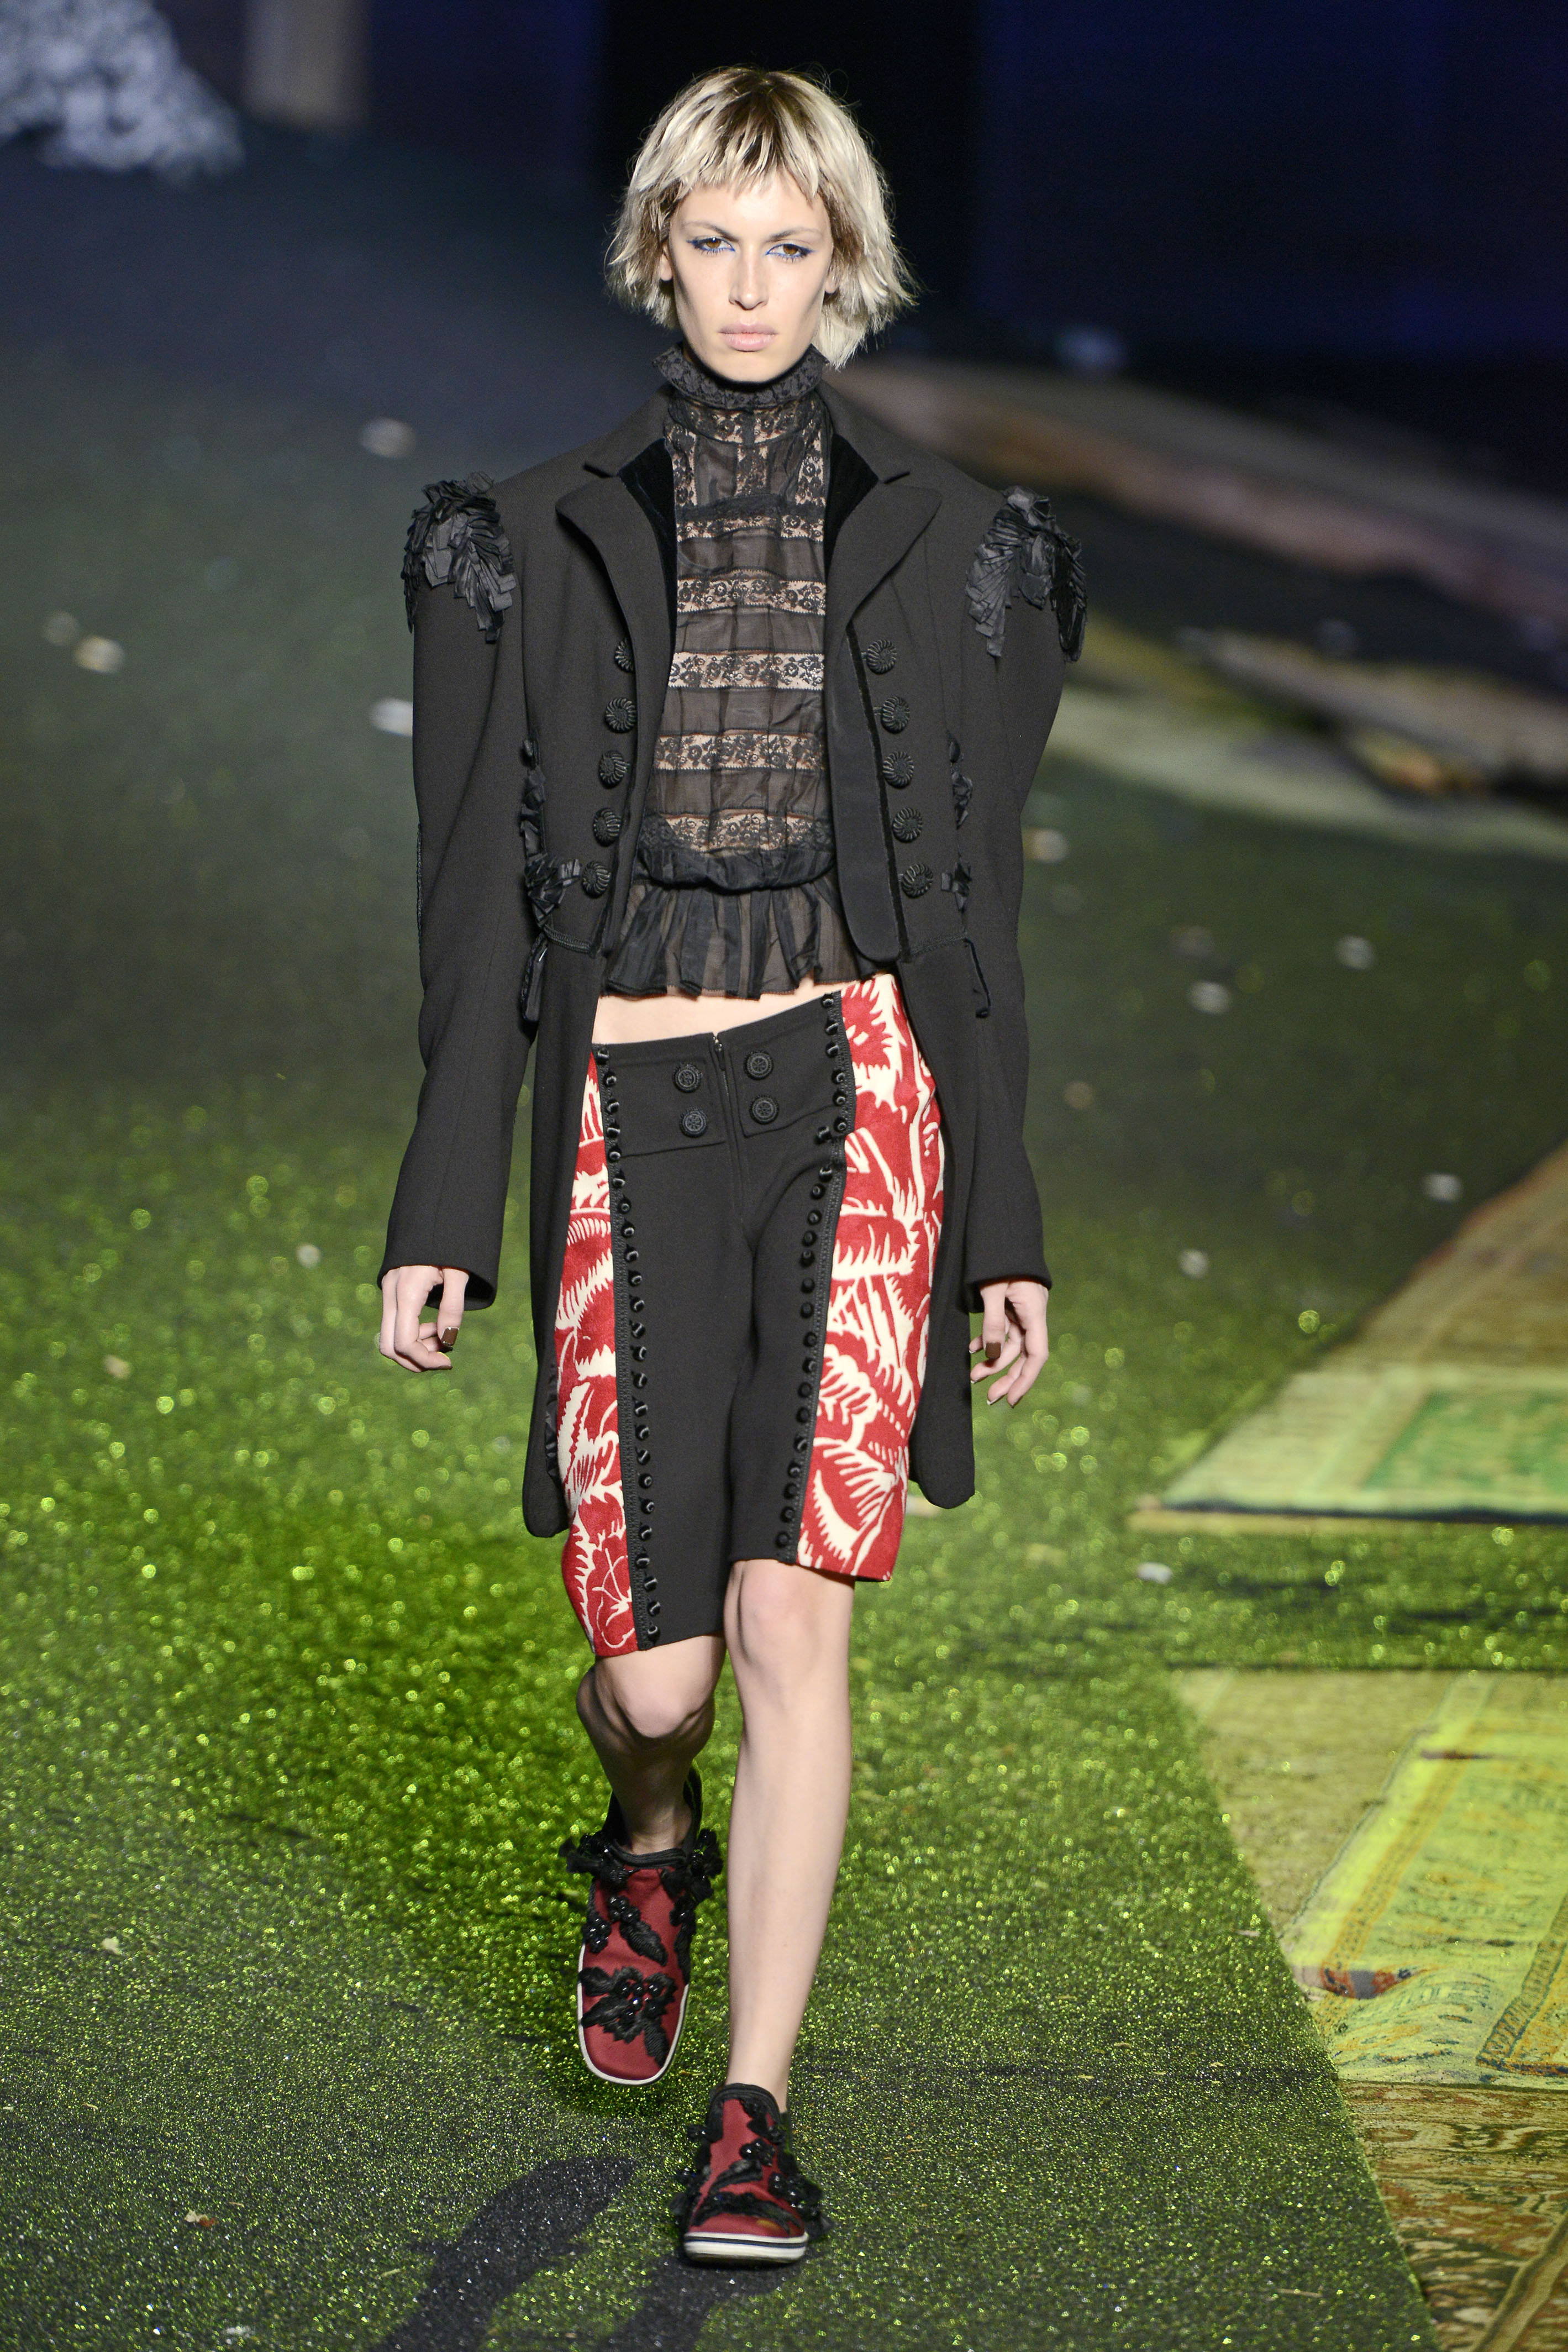 MARC_JACOBS  Ready to wear spring summer 2014_ New York september 2013